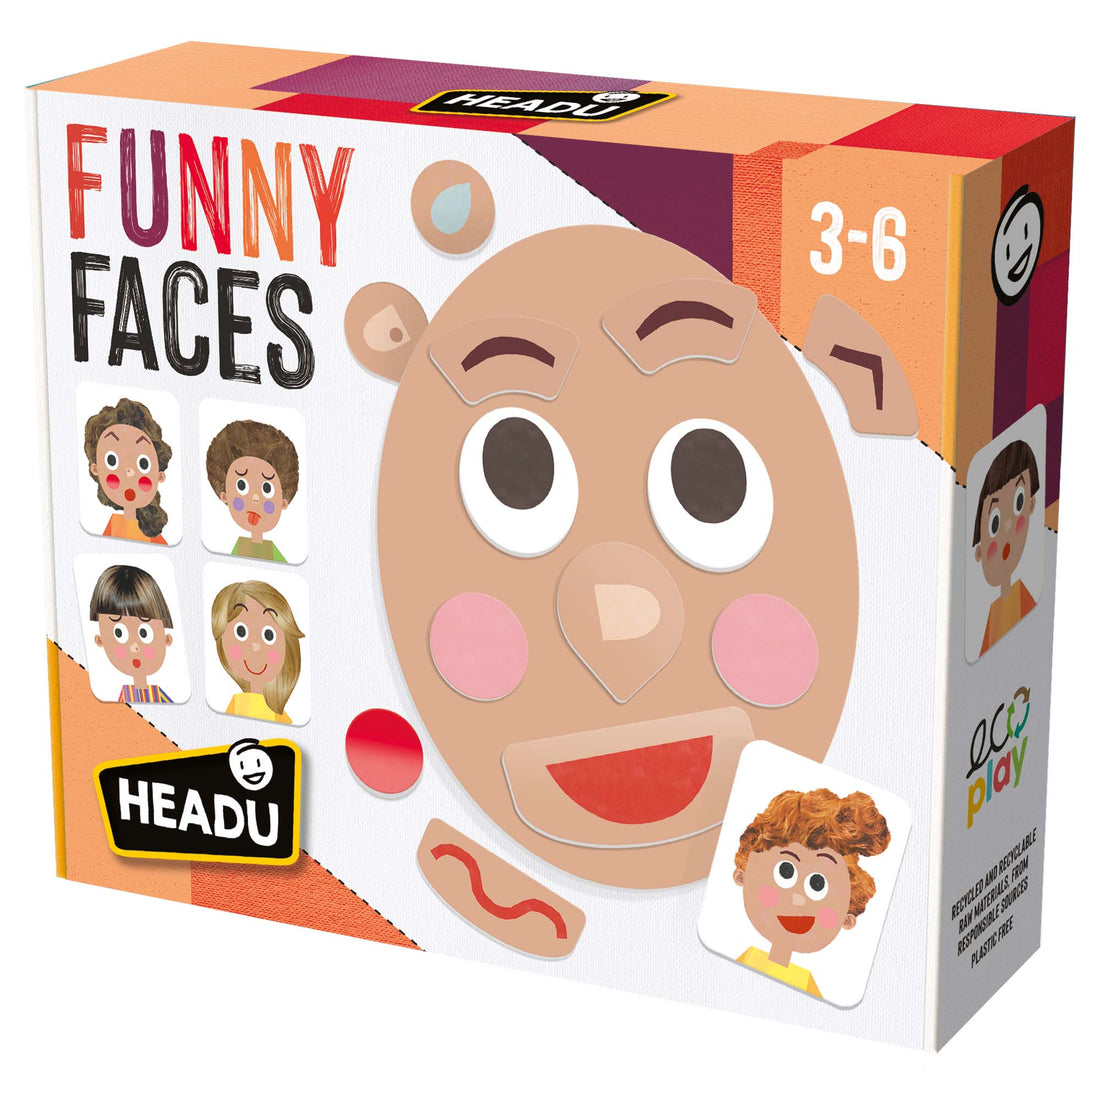 Ecoplay - Funny Faces